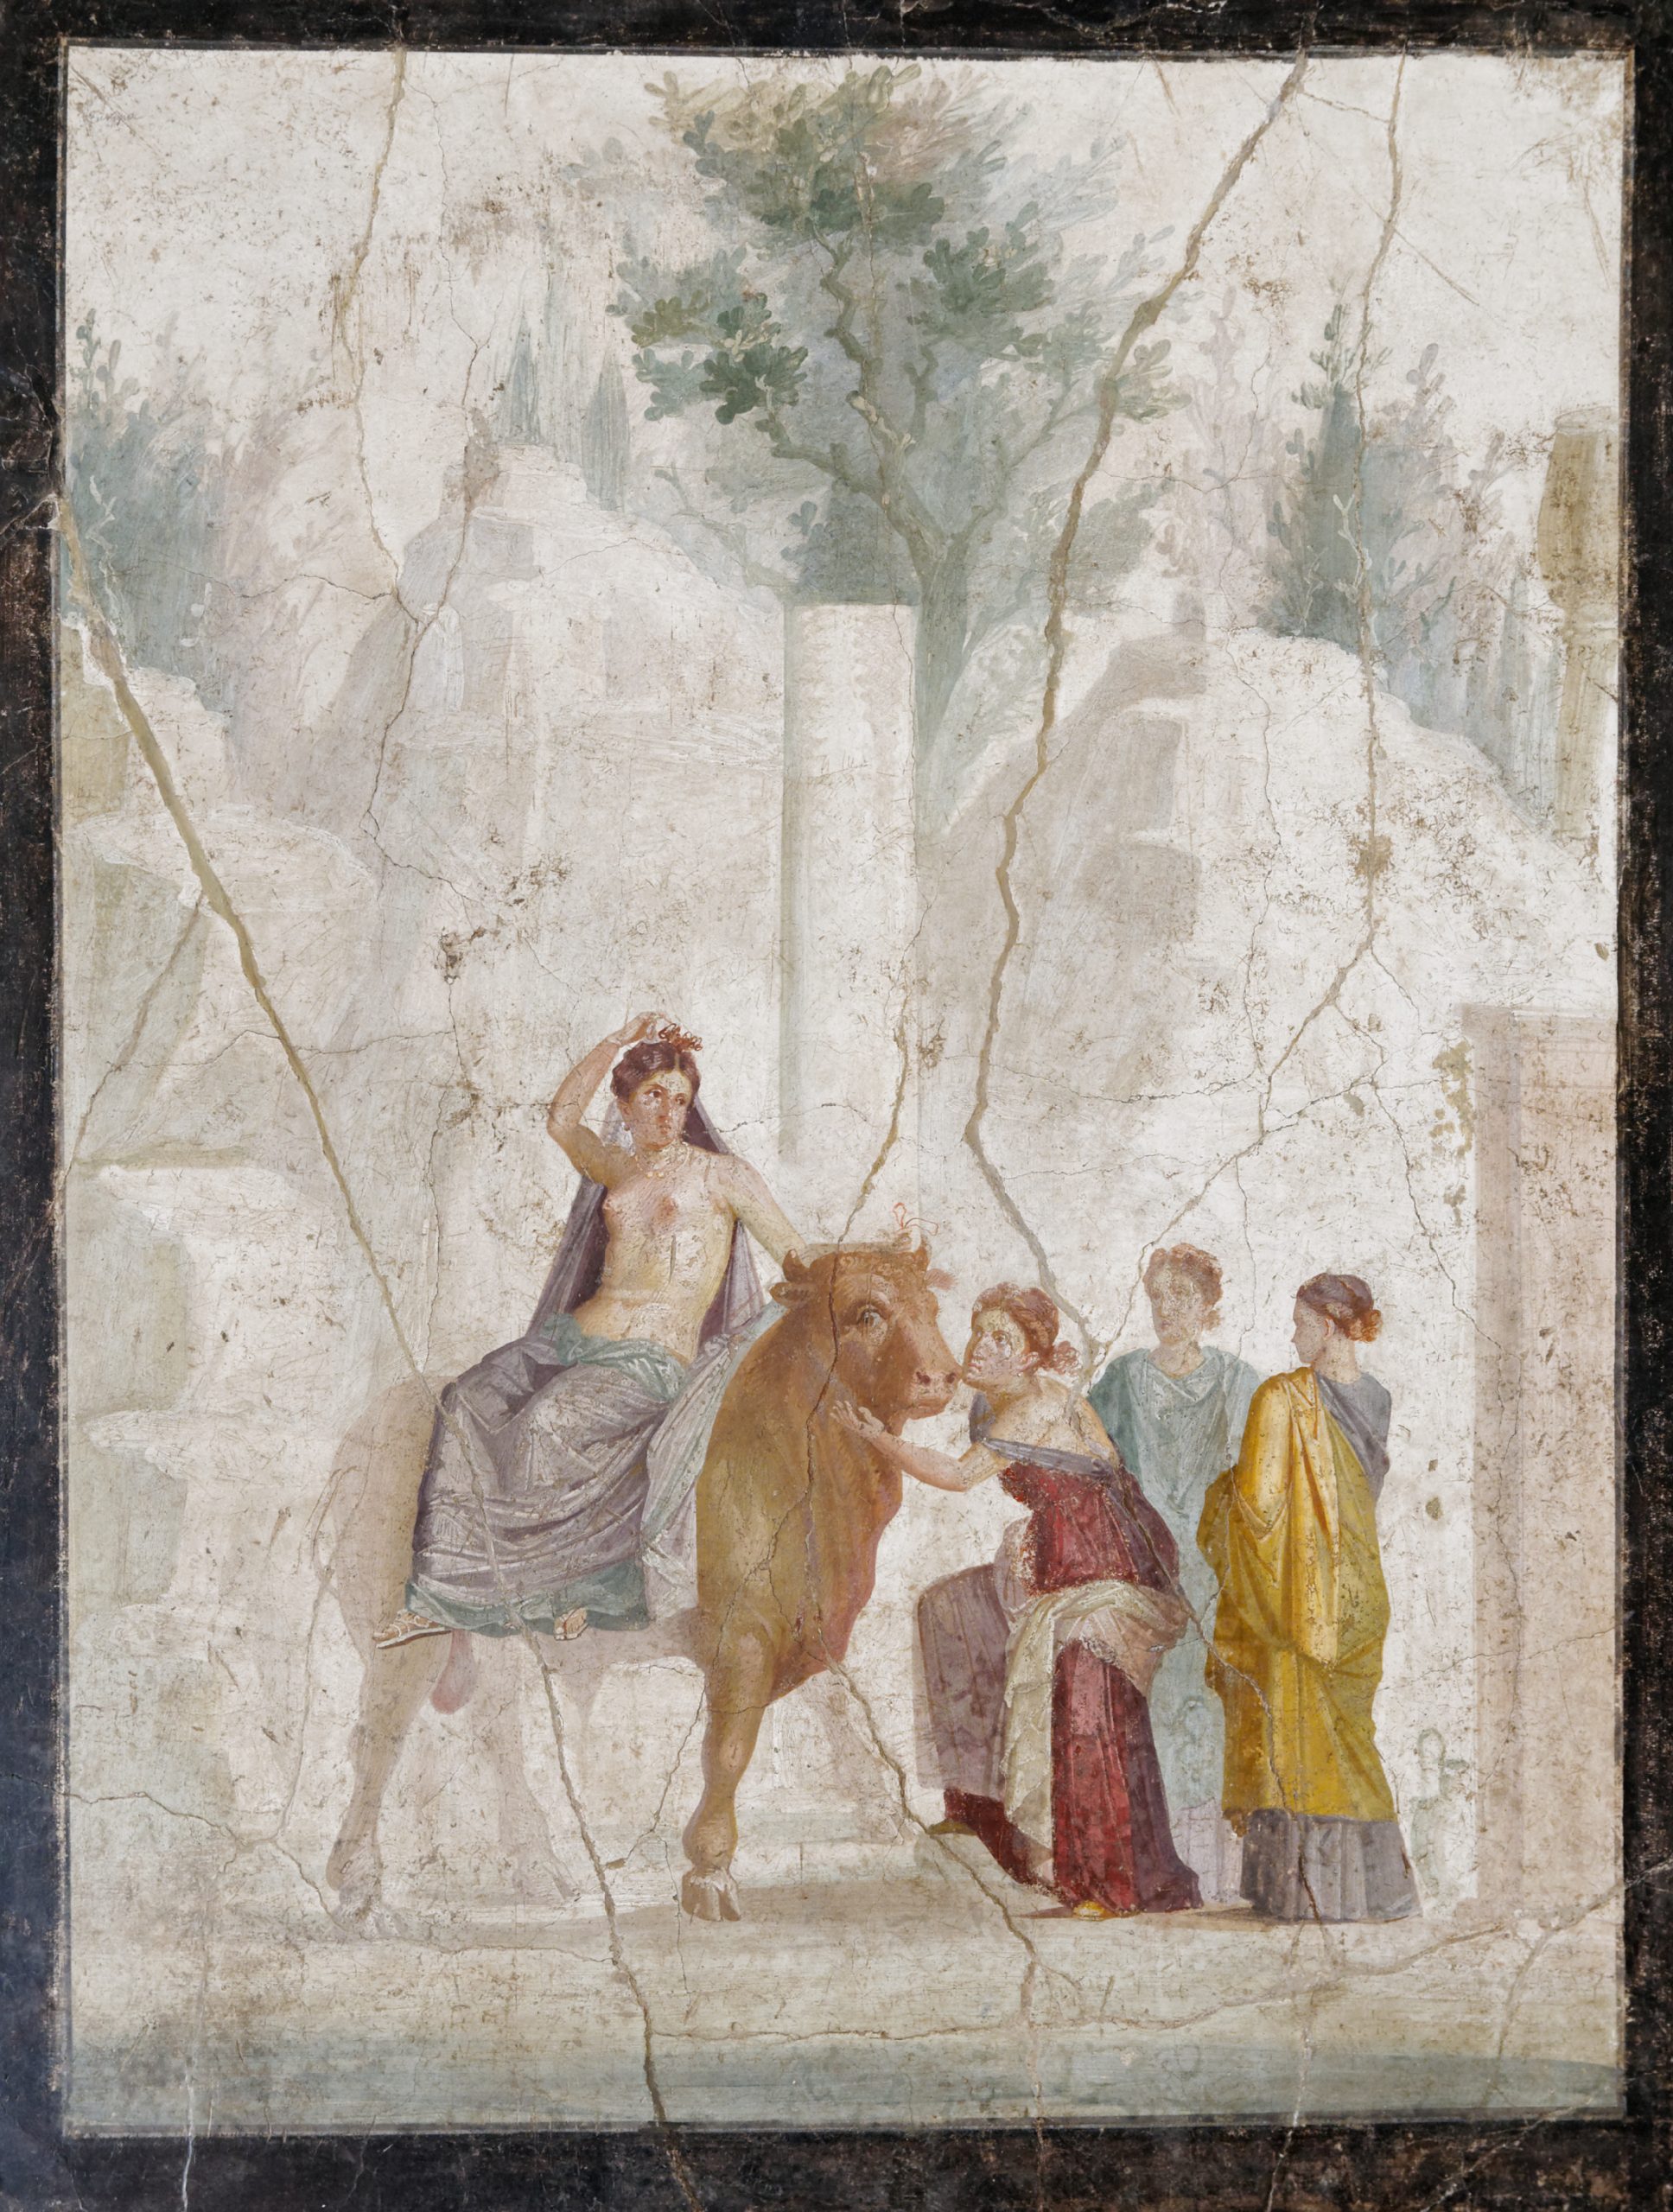 Europa, nude from the waist up, is seated on a golden bull. Three women watch, while one pets the bull.